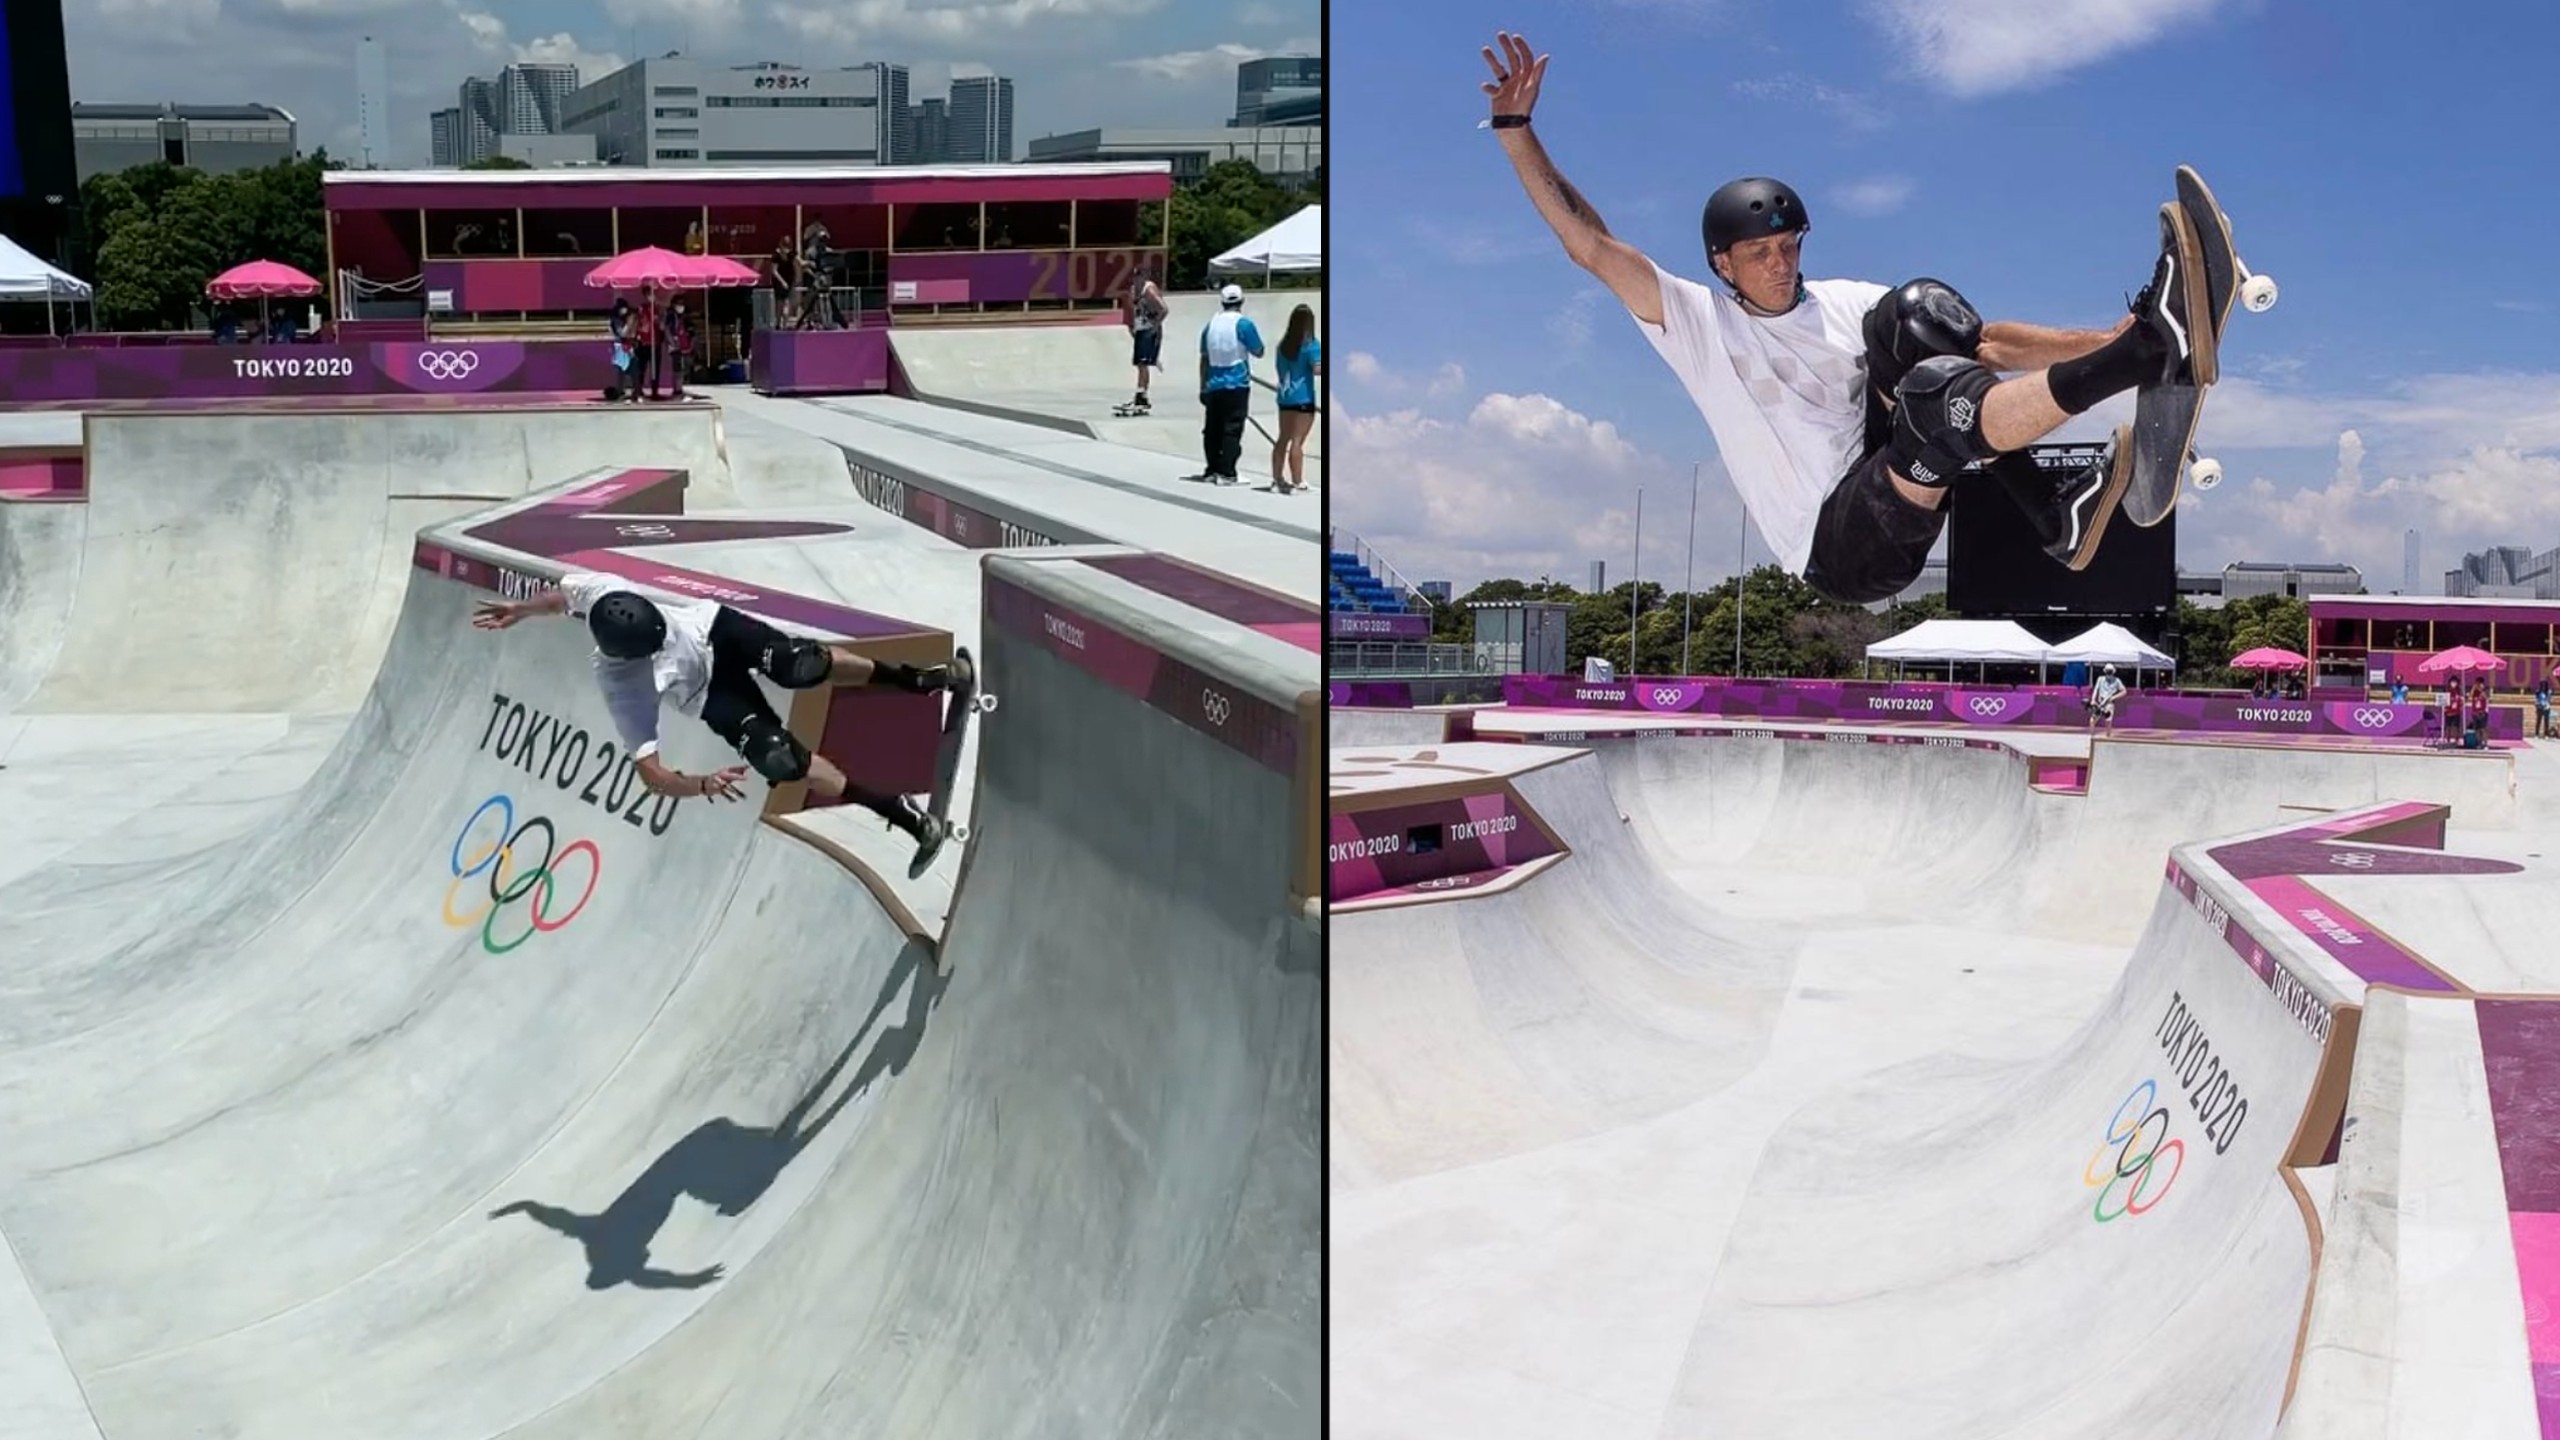 Tony Hawk attends first ever Olympic skating event, tests out Olympic skatepark